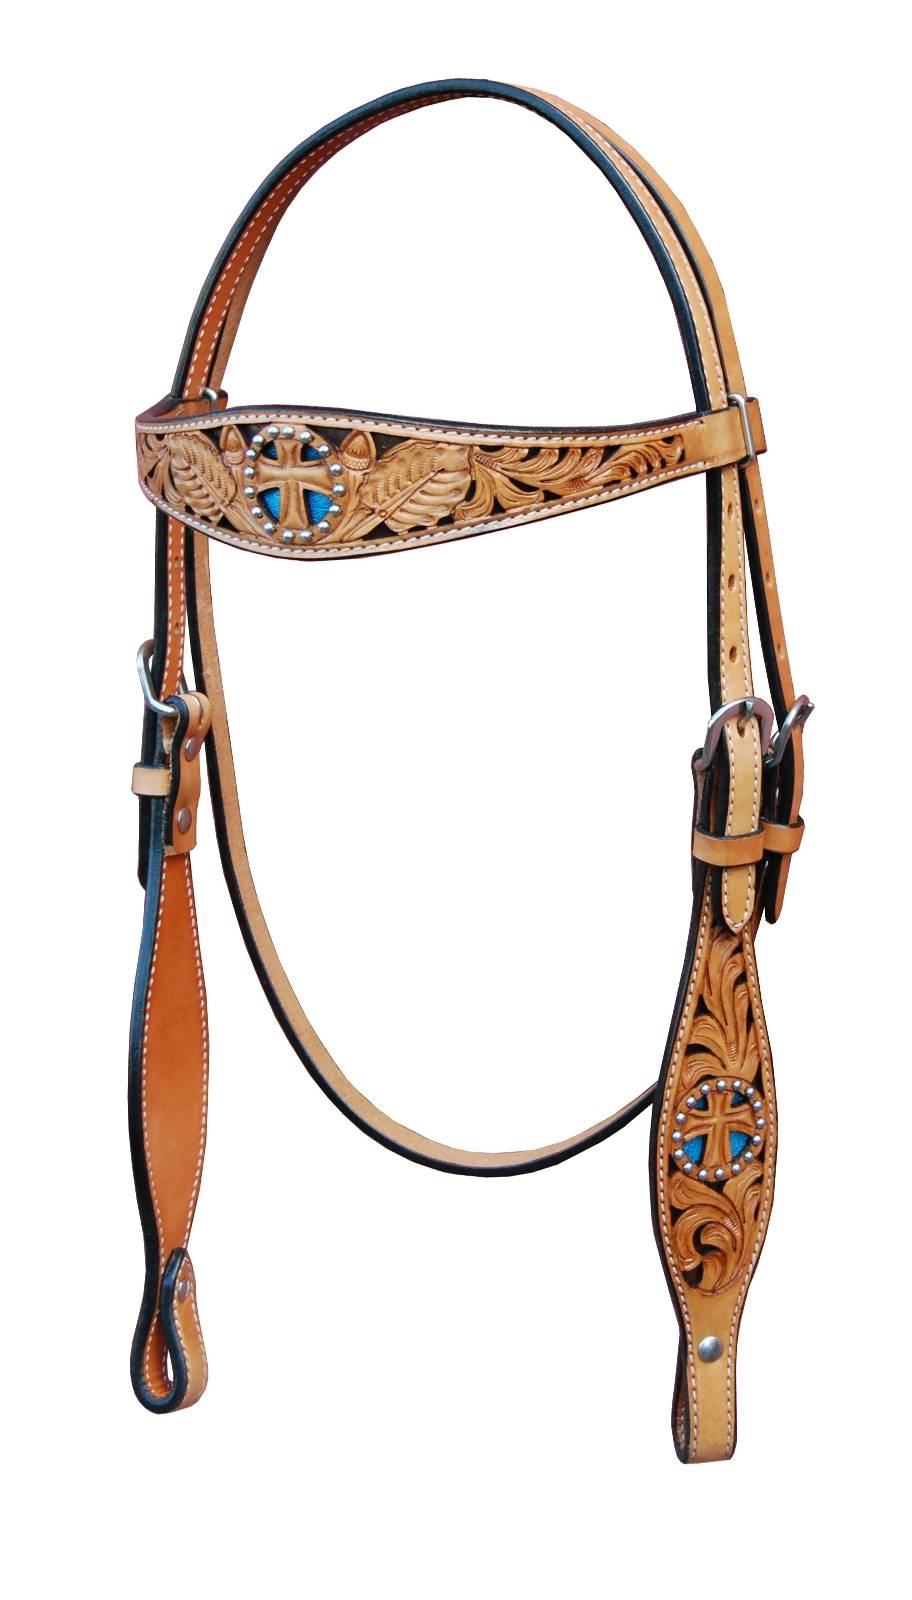 468921TURQ HRSE Turn-Two Browband Headstall - St. Christopher sku 468921TURQ HRSE